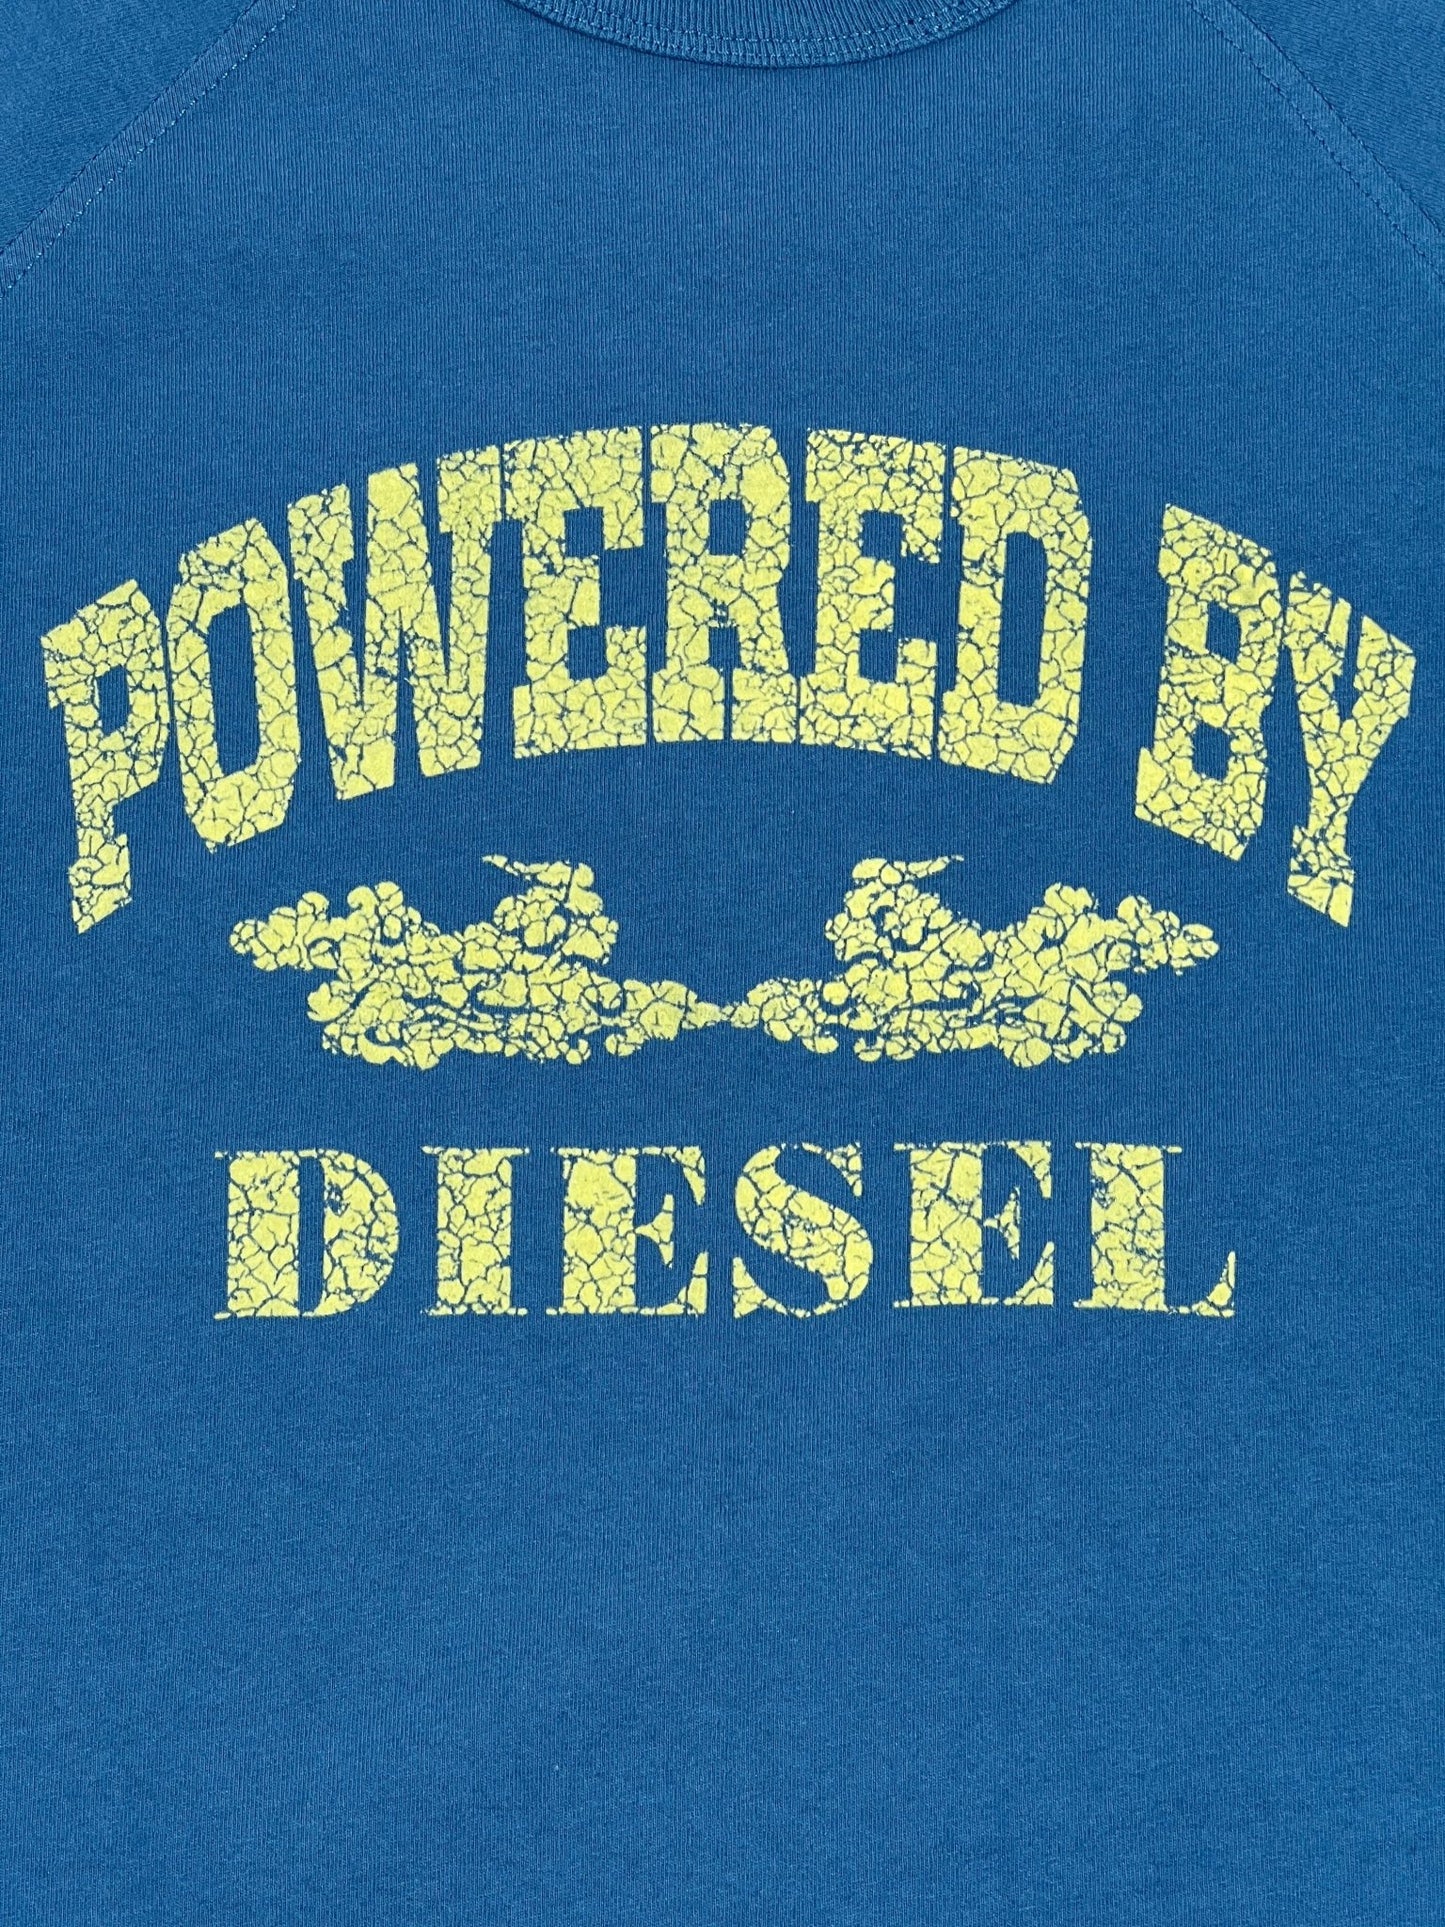 DIESEL T-RUST T-SHIRT TEAL with the text "powered by diesel" printed in yellow, with a distressed effect.